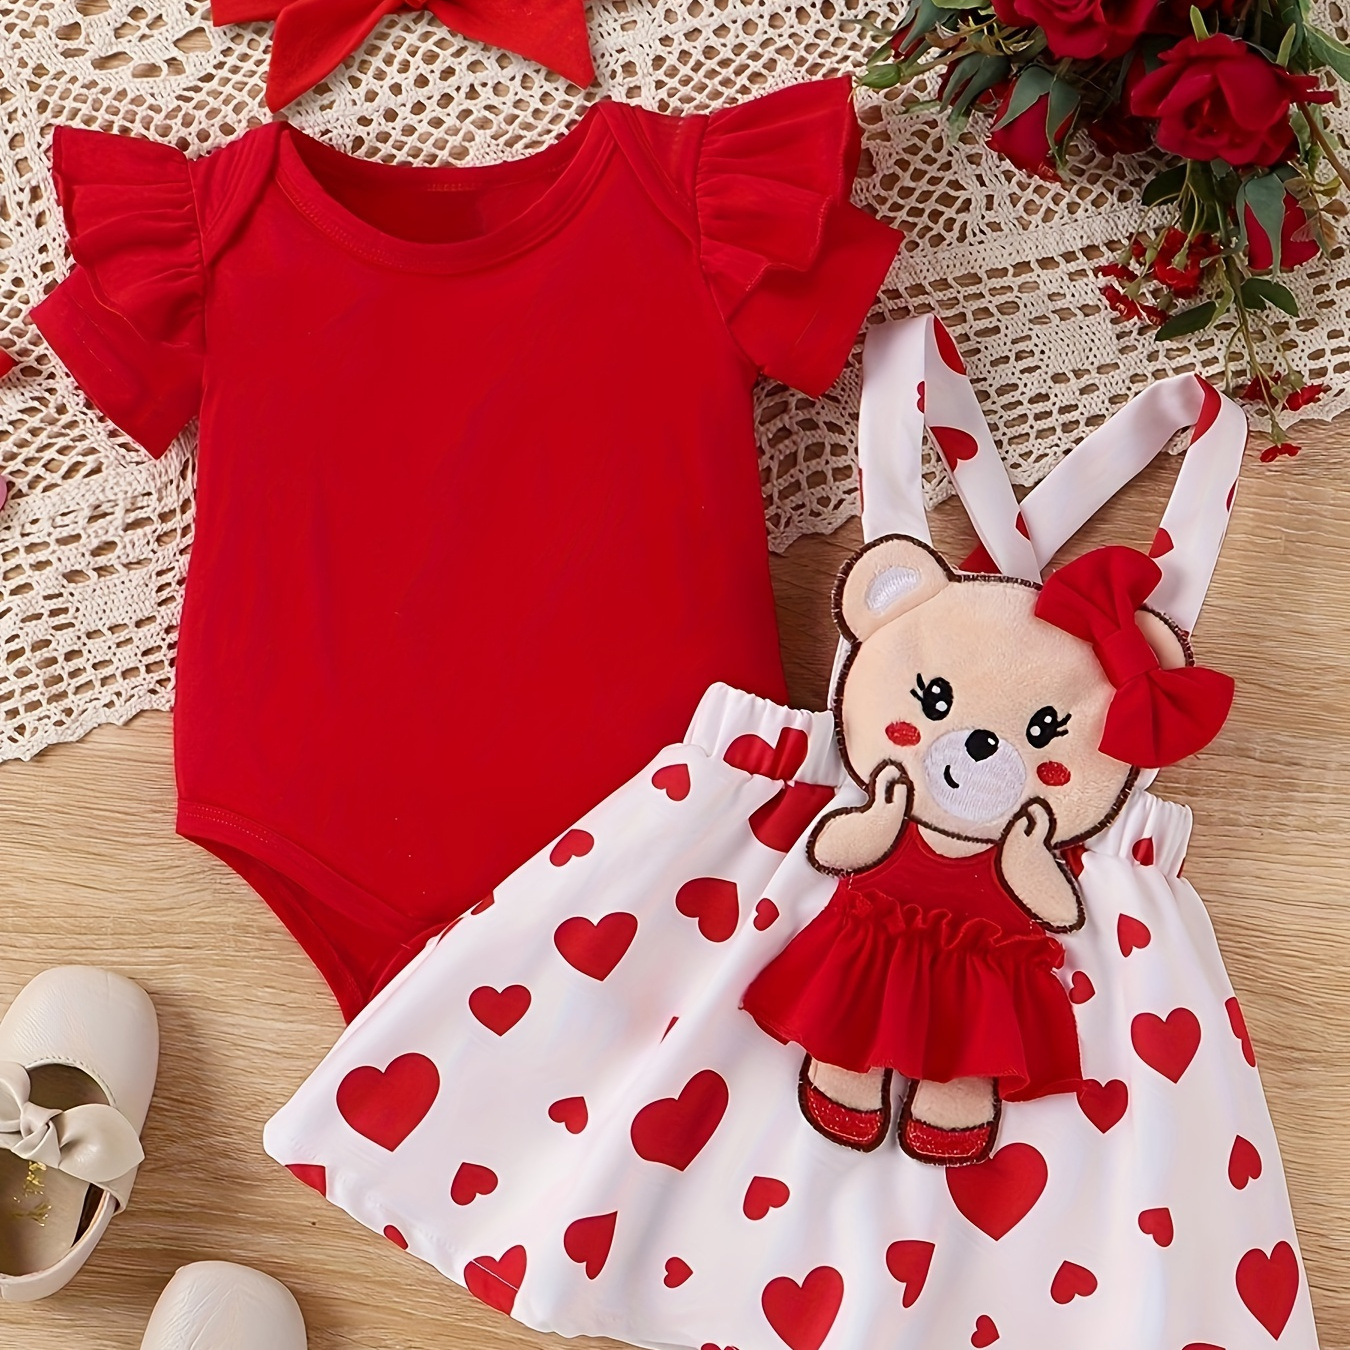 

2pcs Infant's Cute Bear Embroidered Valentine's Day Style Outfit, Solid Color Romper & Heart Pattern Overall Skirt, Baby Girl's Clothes